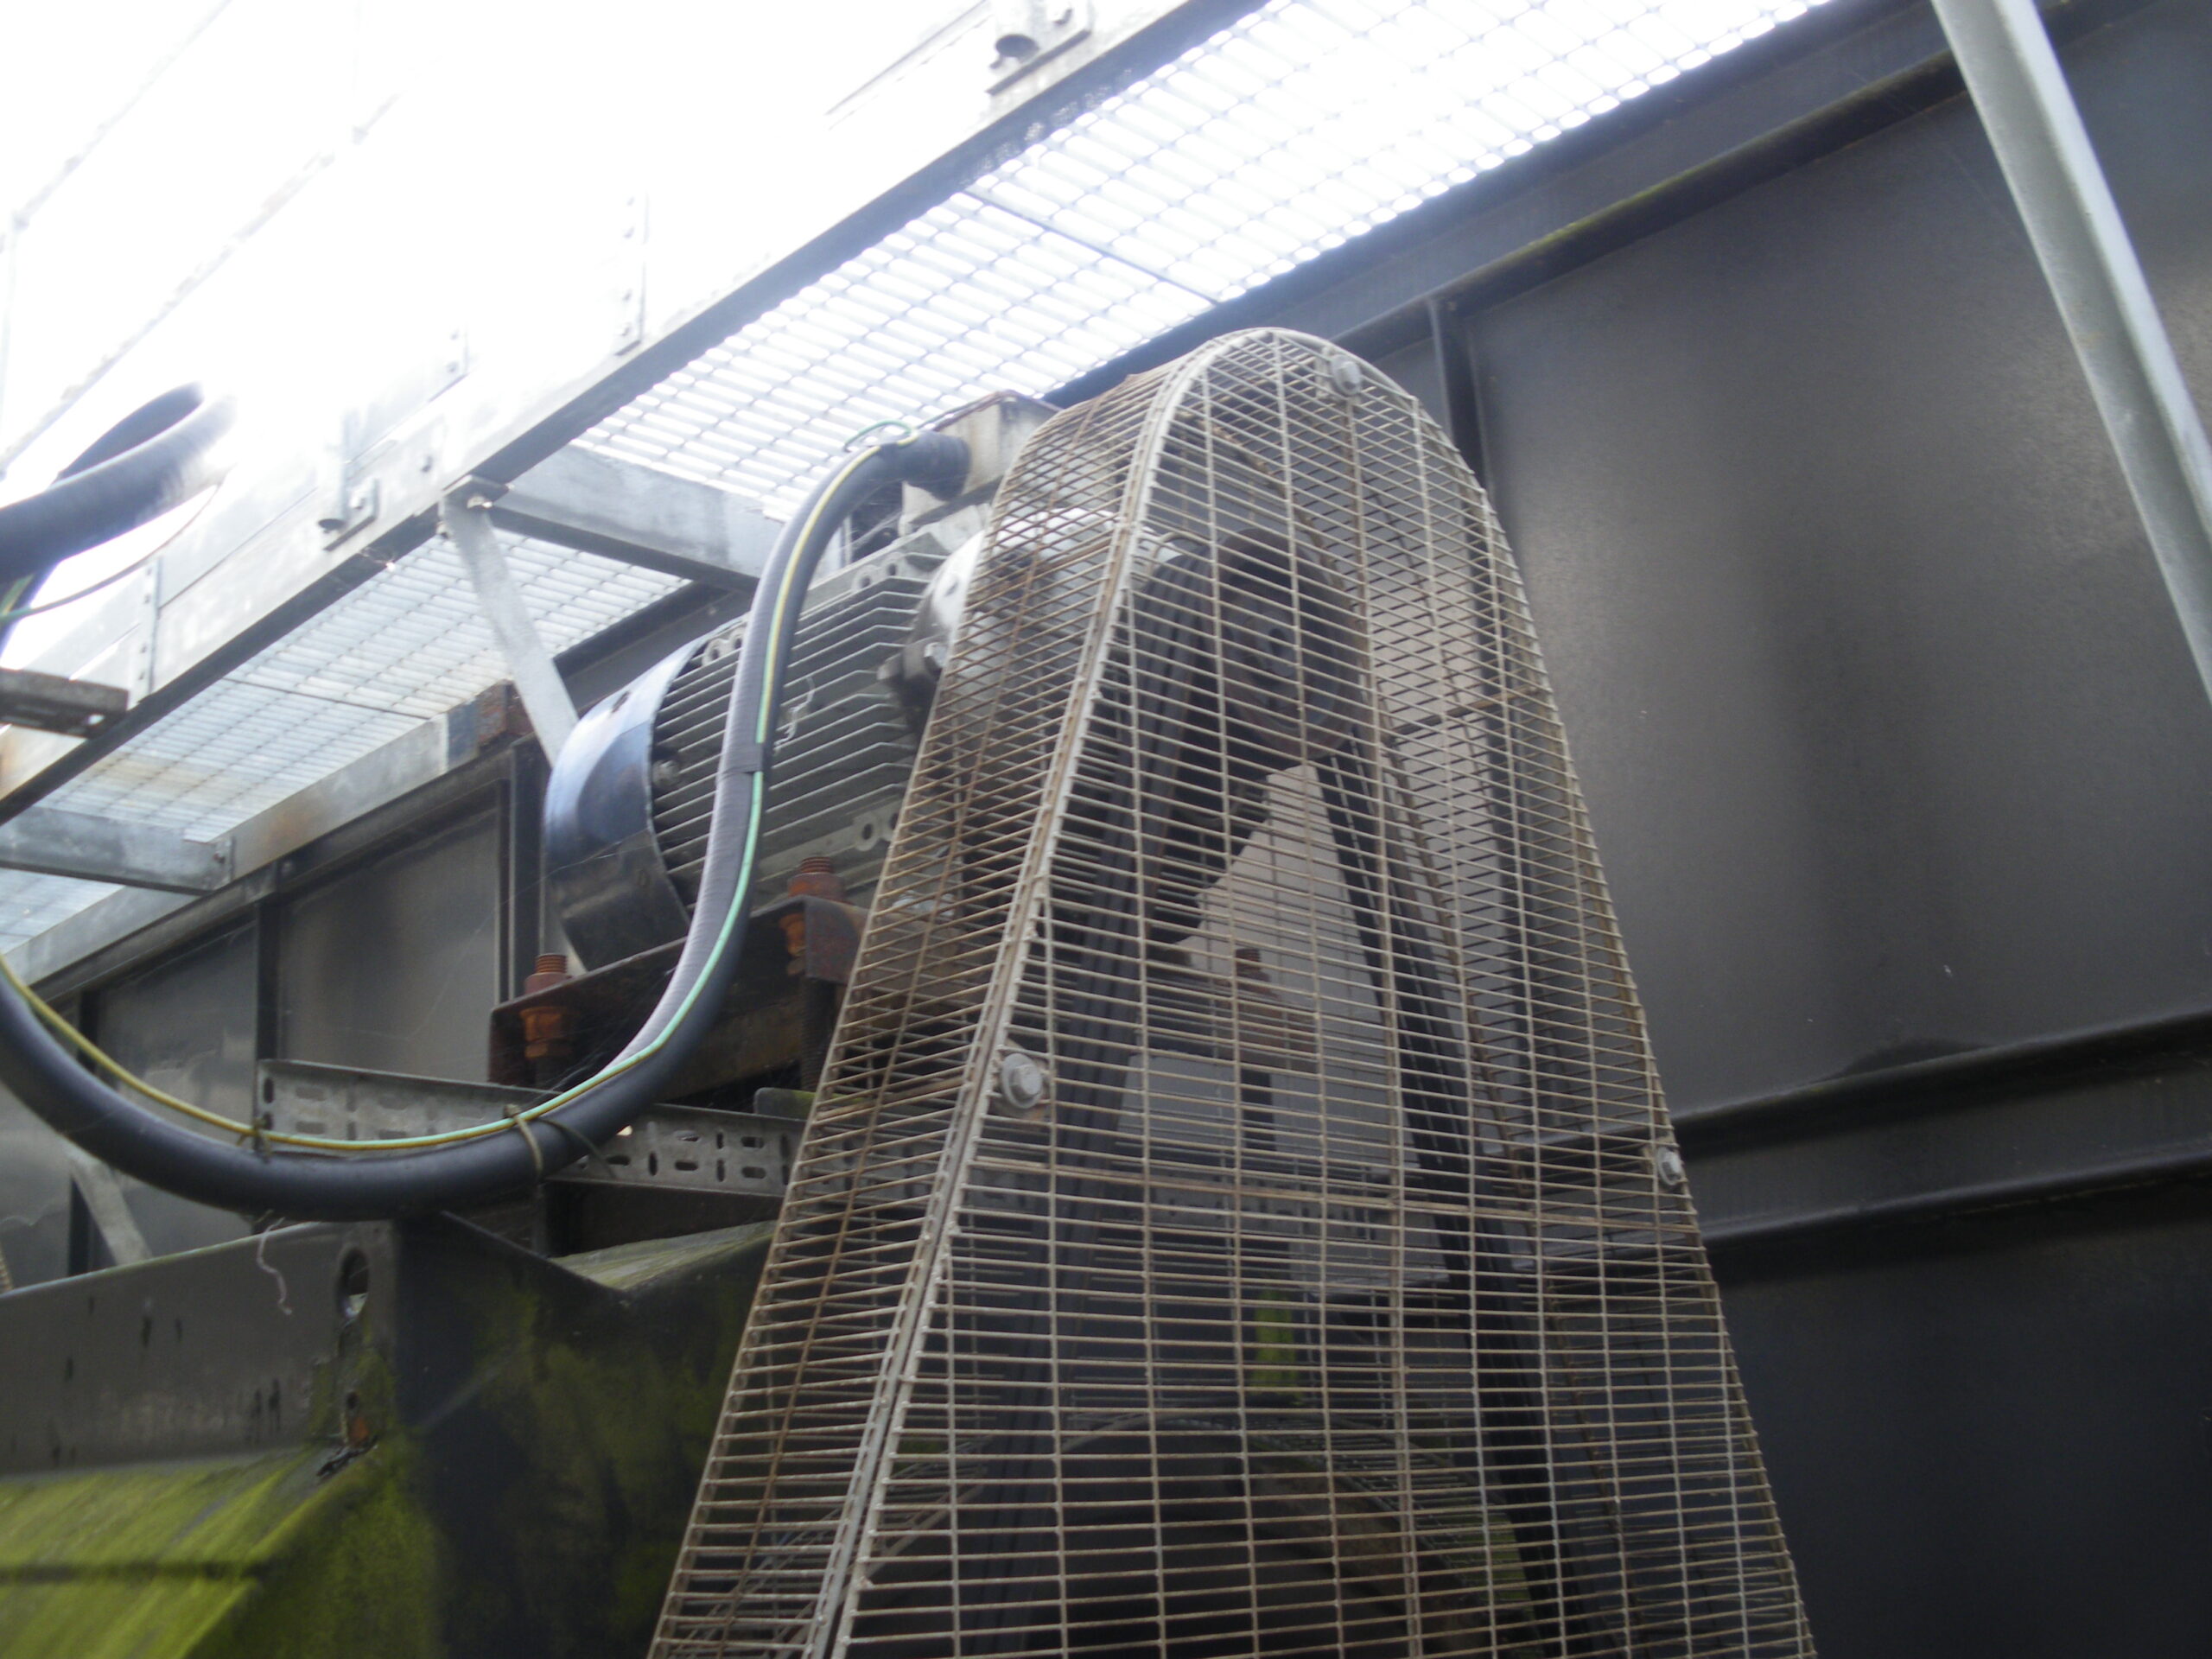 Cooling tower fan motor, 11 Sep 2011